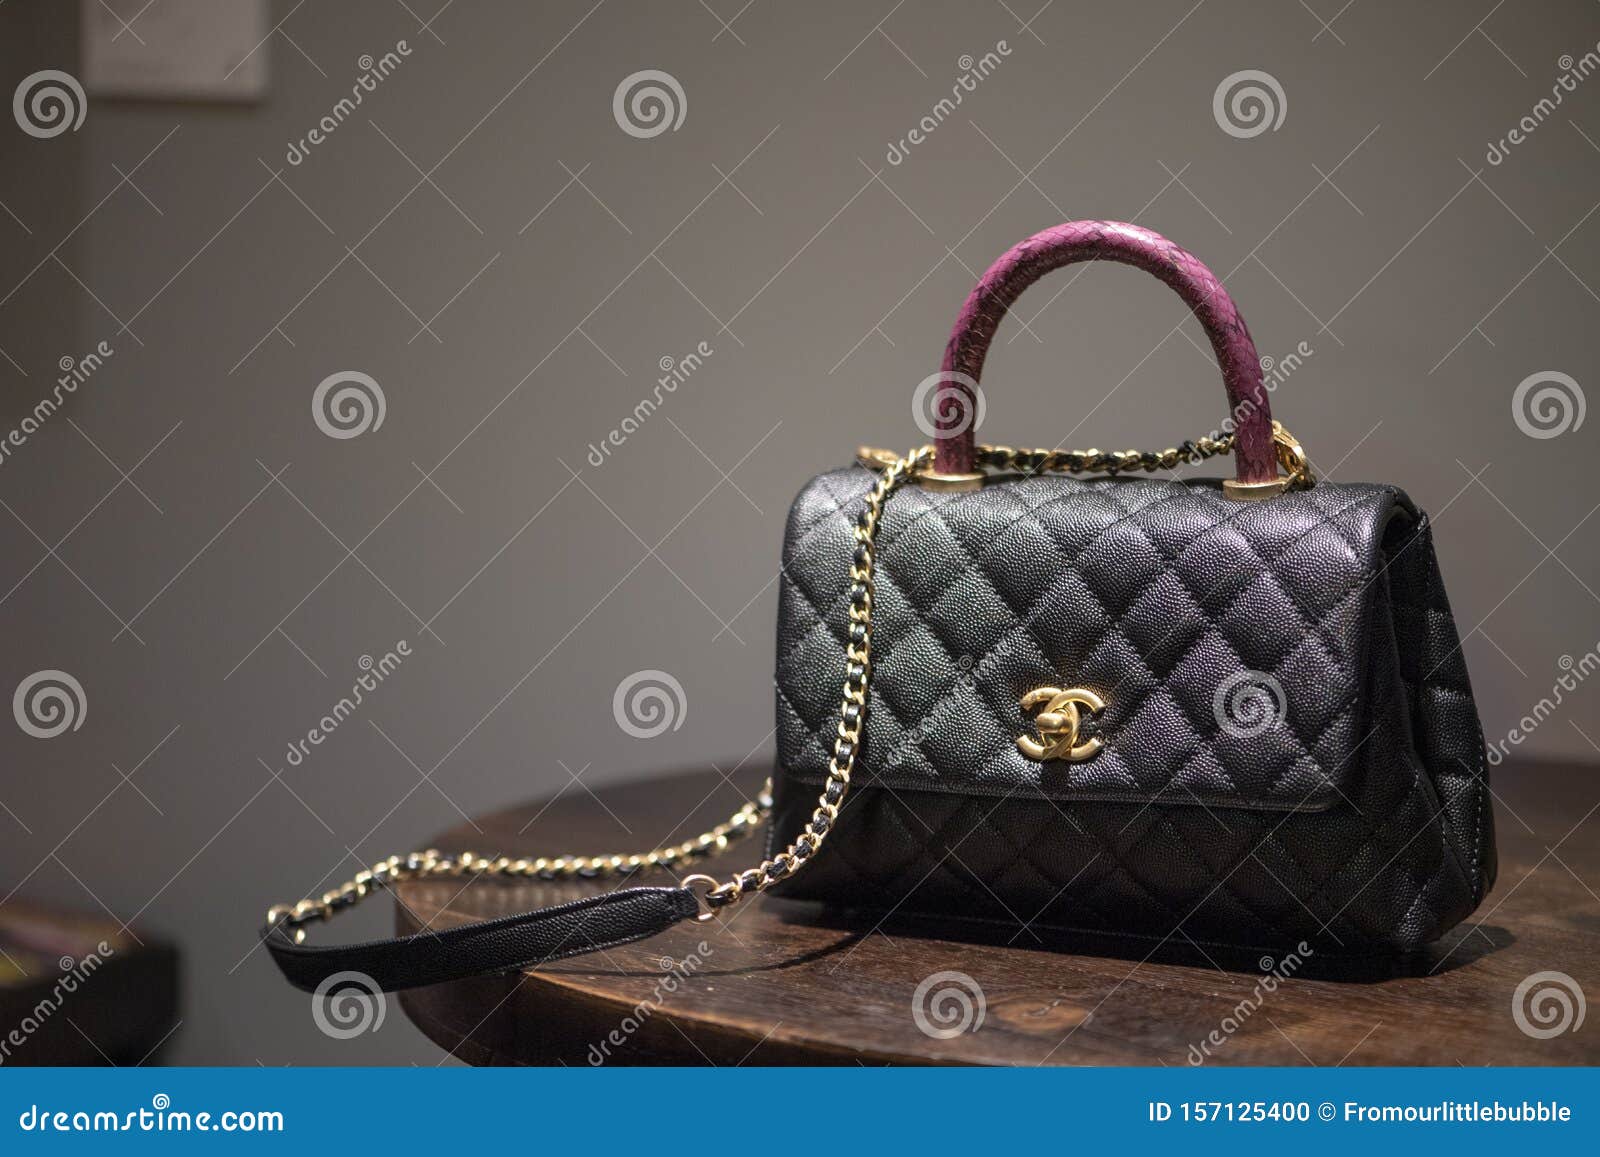 Authentic Black Chanel Bag Sitting on Table Editorial Image